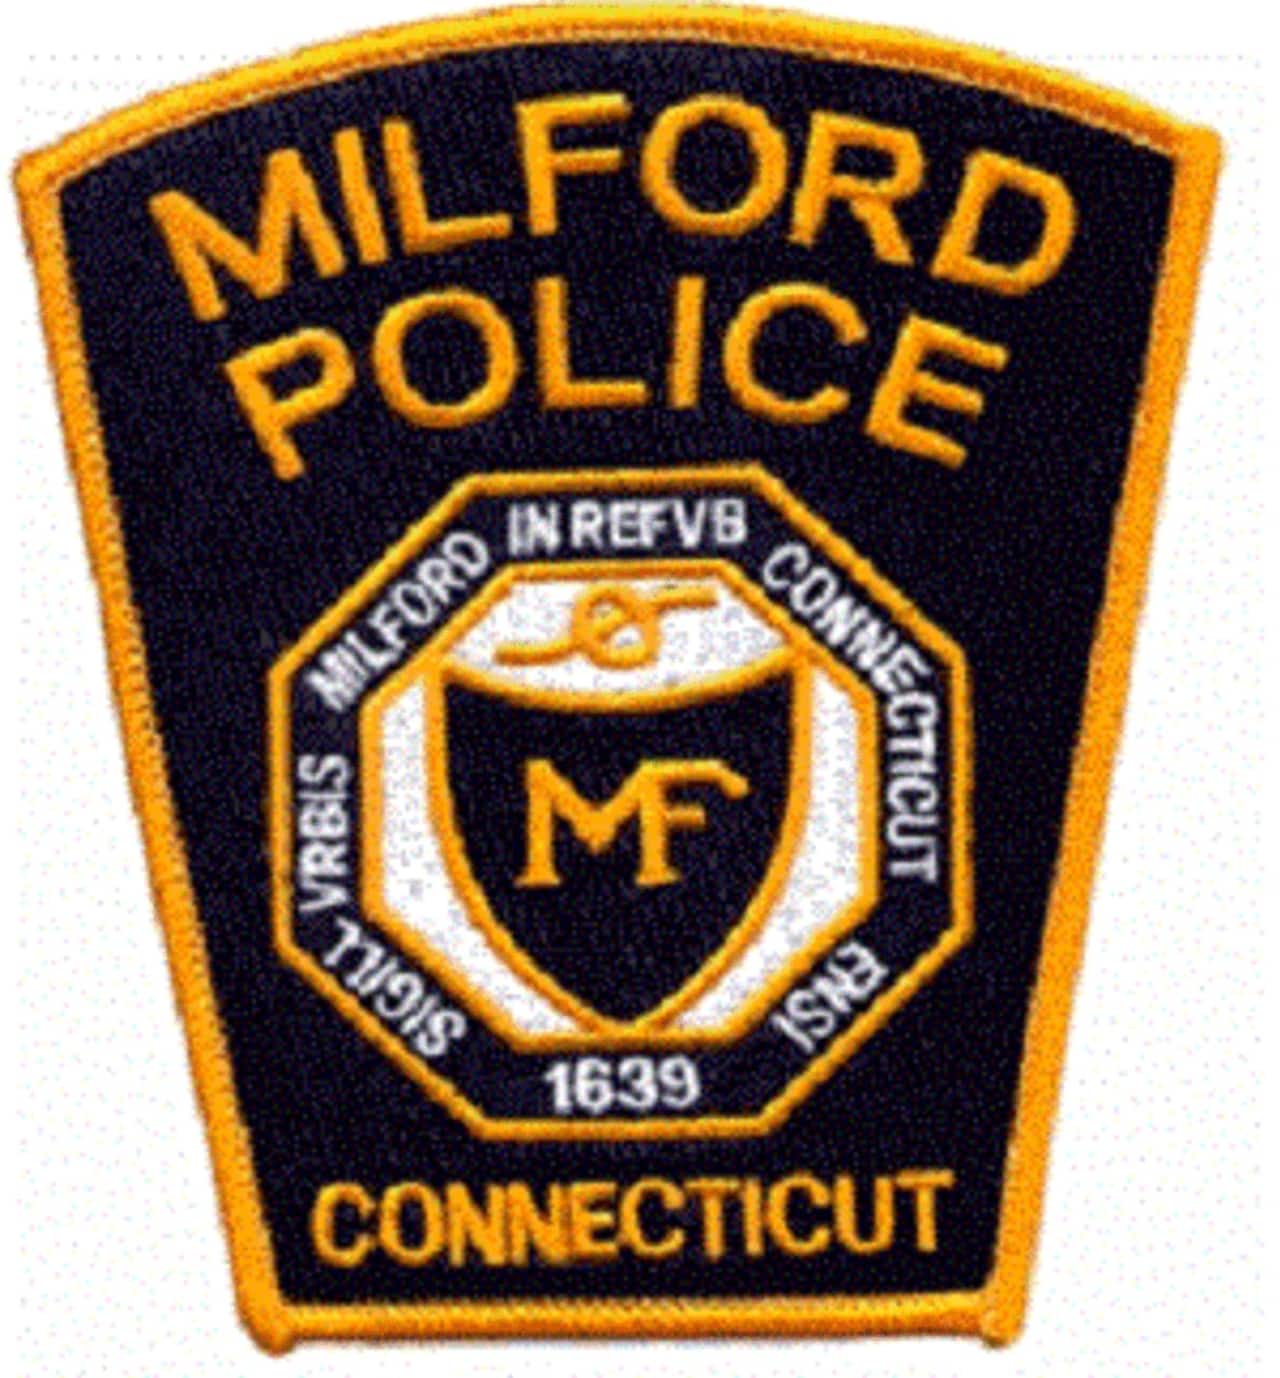 Milford police arrested a 28-year-old Shelton man in connection to a May tire-slashing incident in Milford, the CT Post reports.